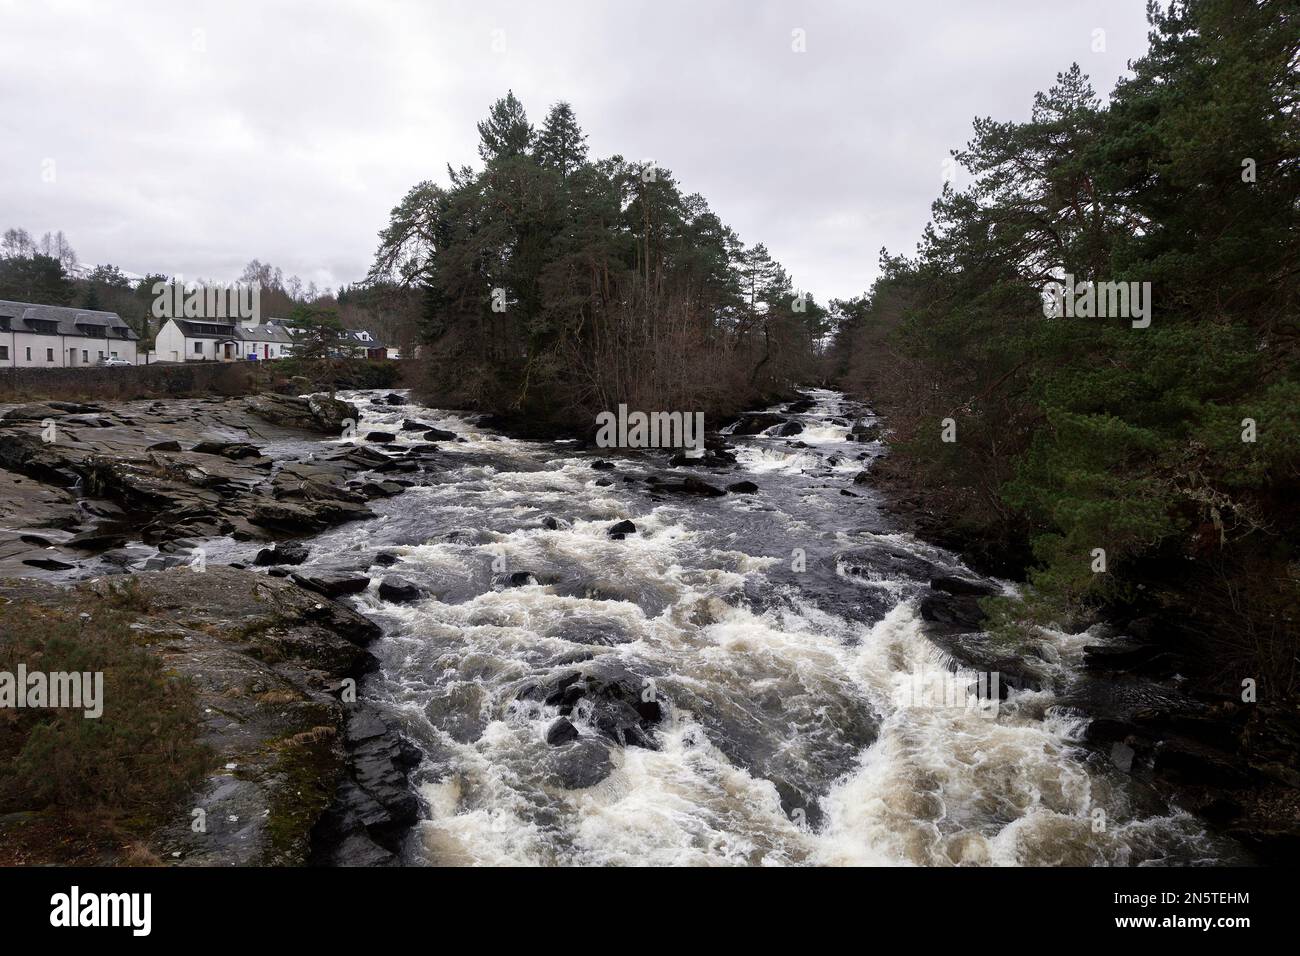 The Falls of Dochart from just off the Rob Roy Way walking trail at Killin, Perthshire, Loch Lomond and the Trossachs National Park, Scotland. Stock Photo